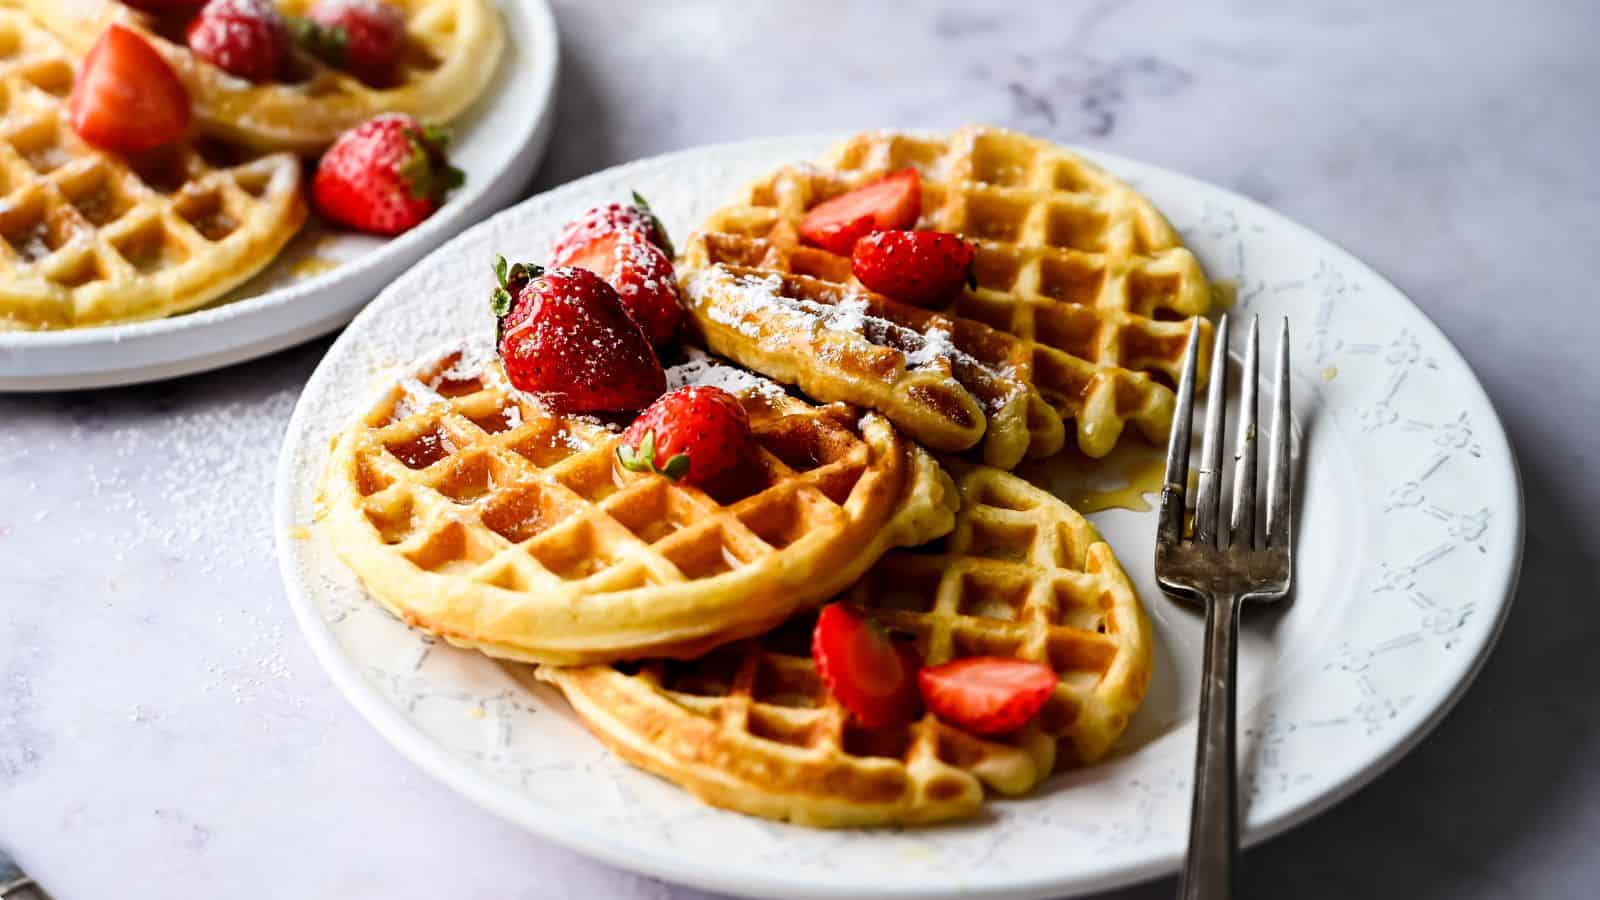 Freshly made waffles on a plate with strawberries.